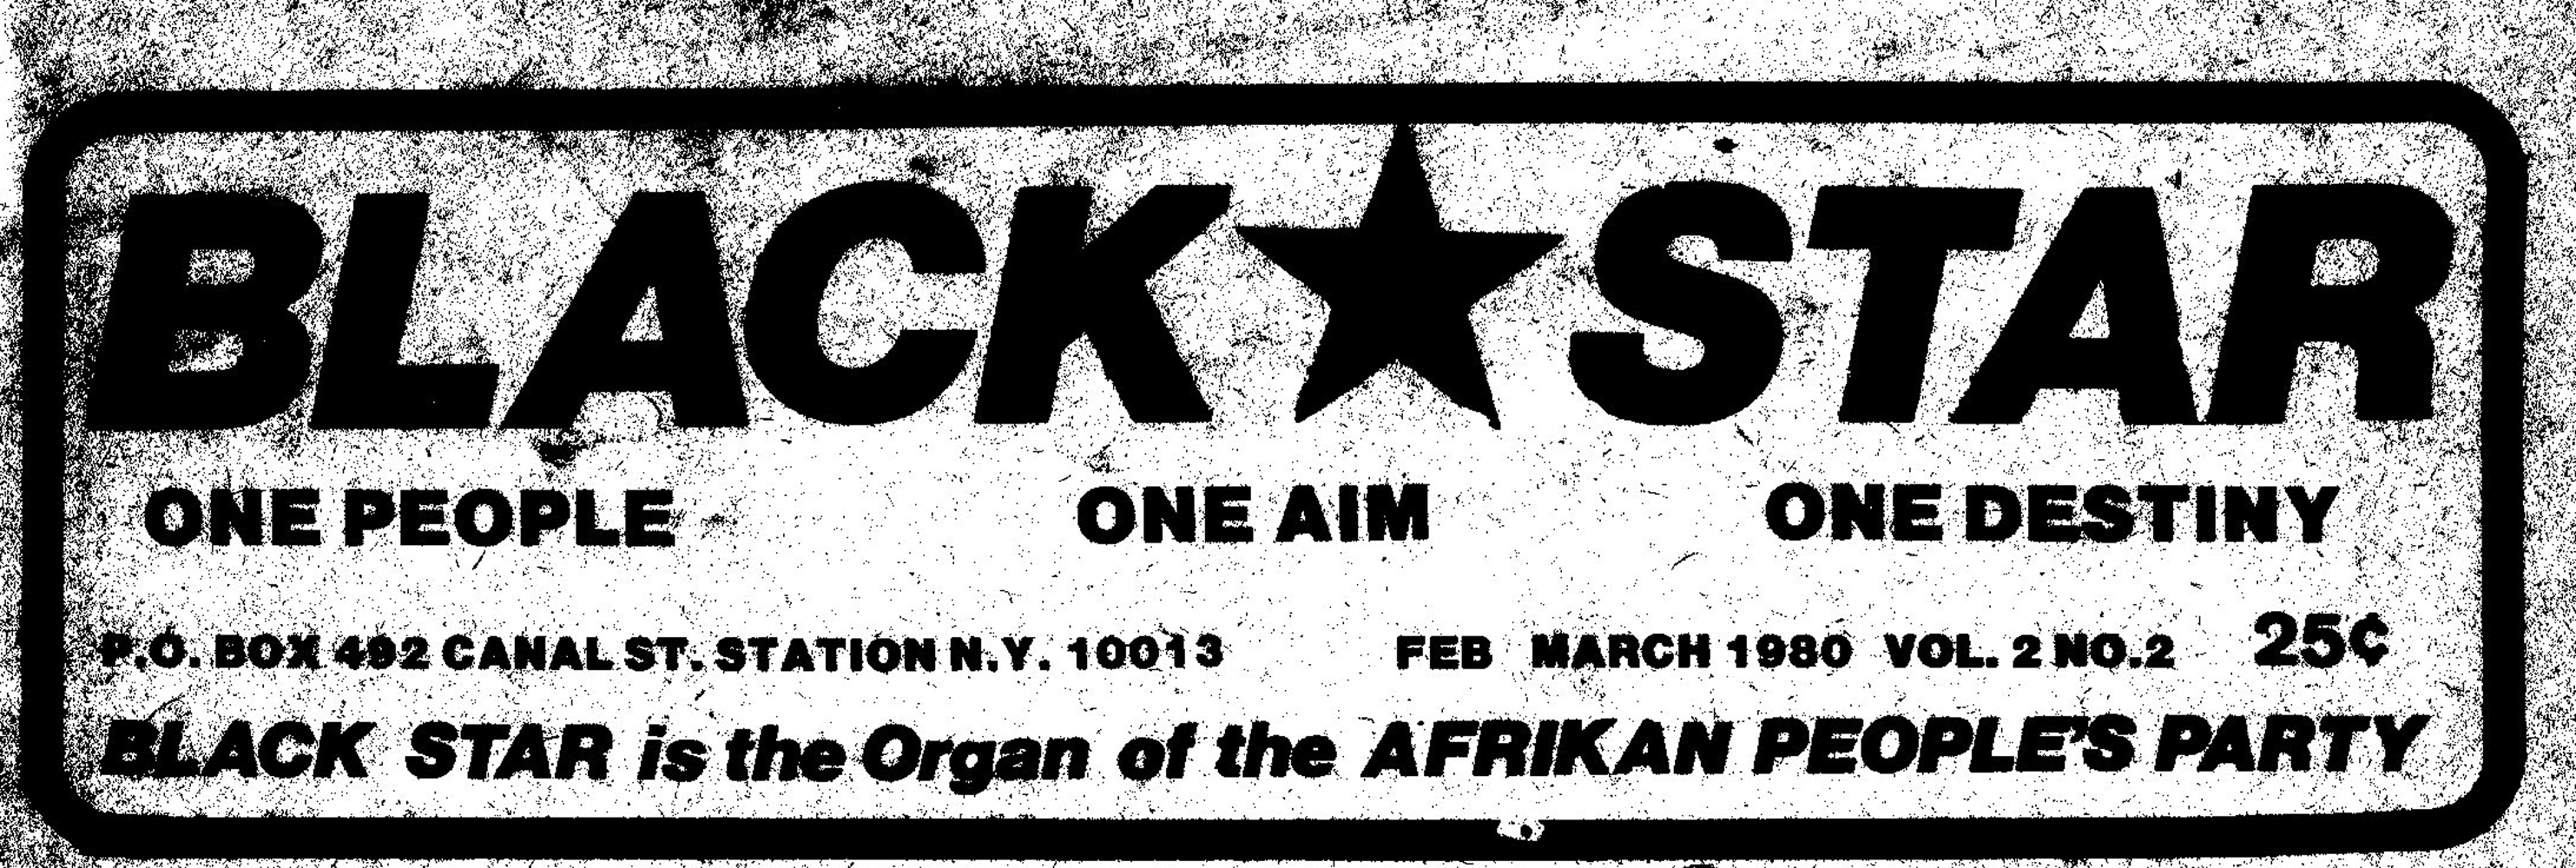 Afrikan Peoples Party